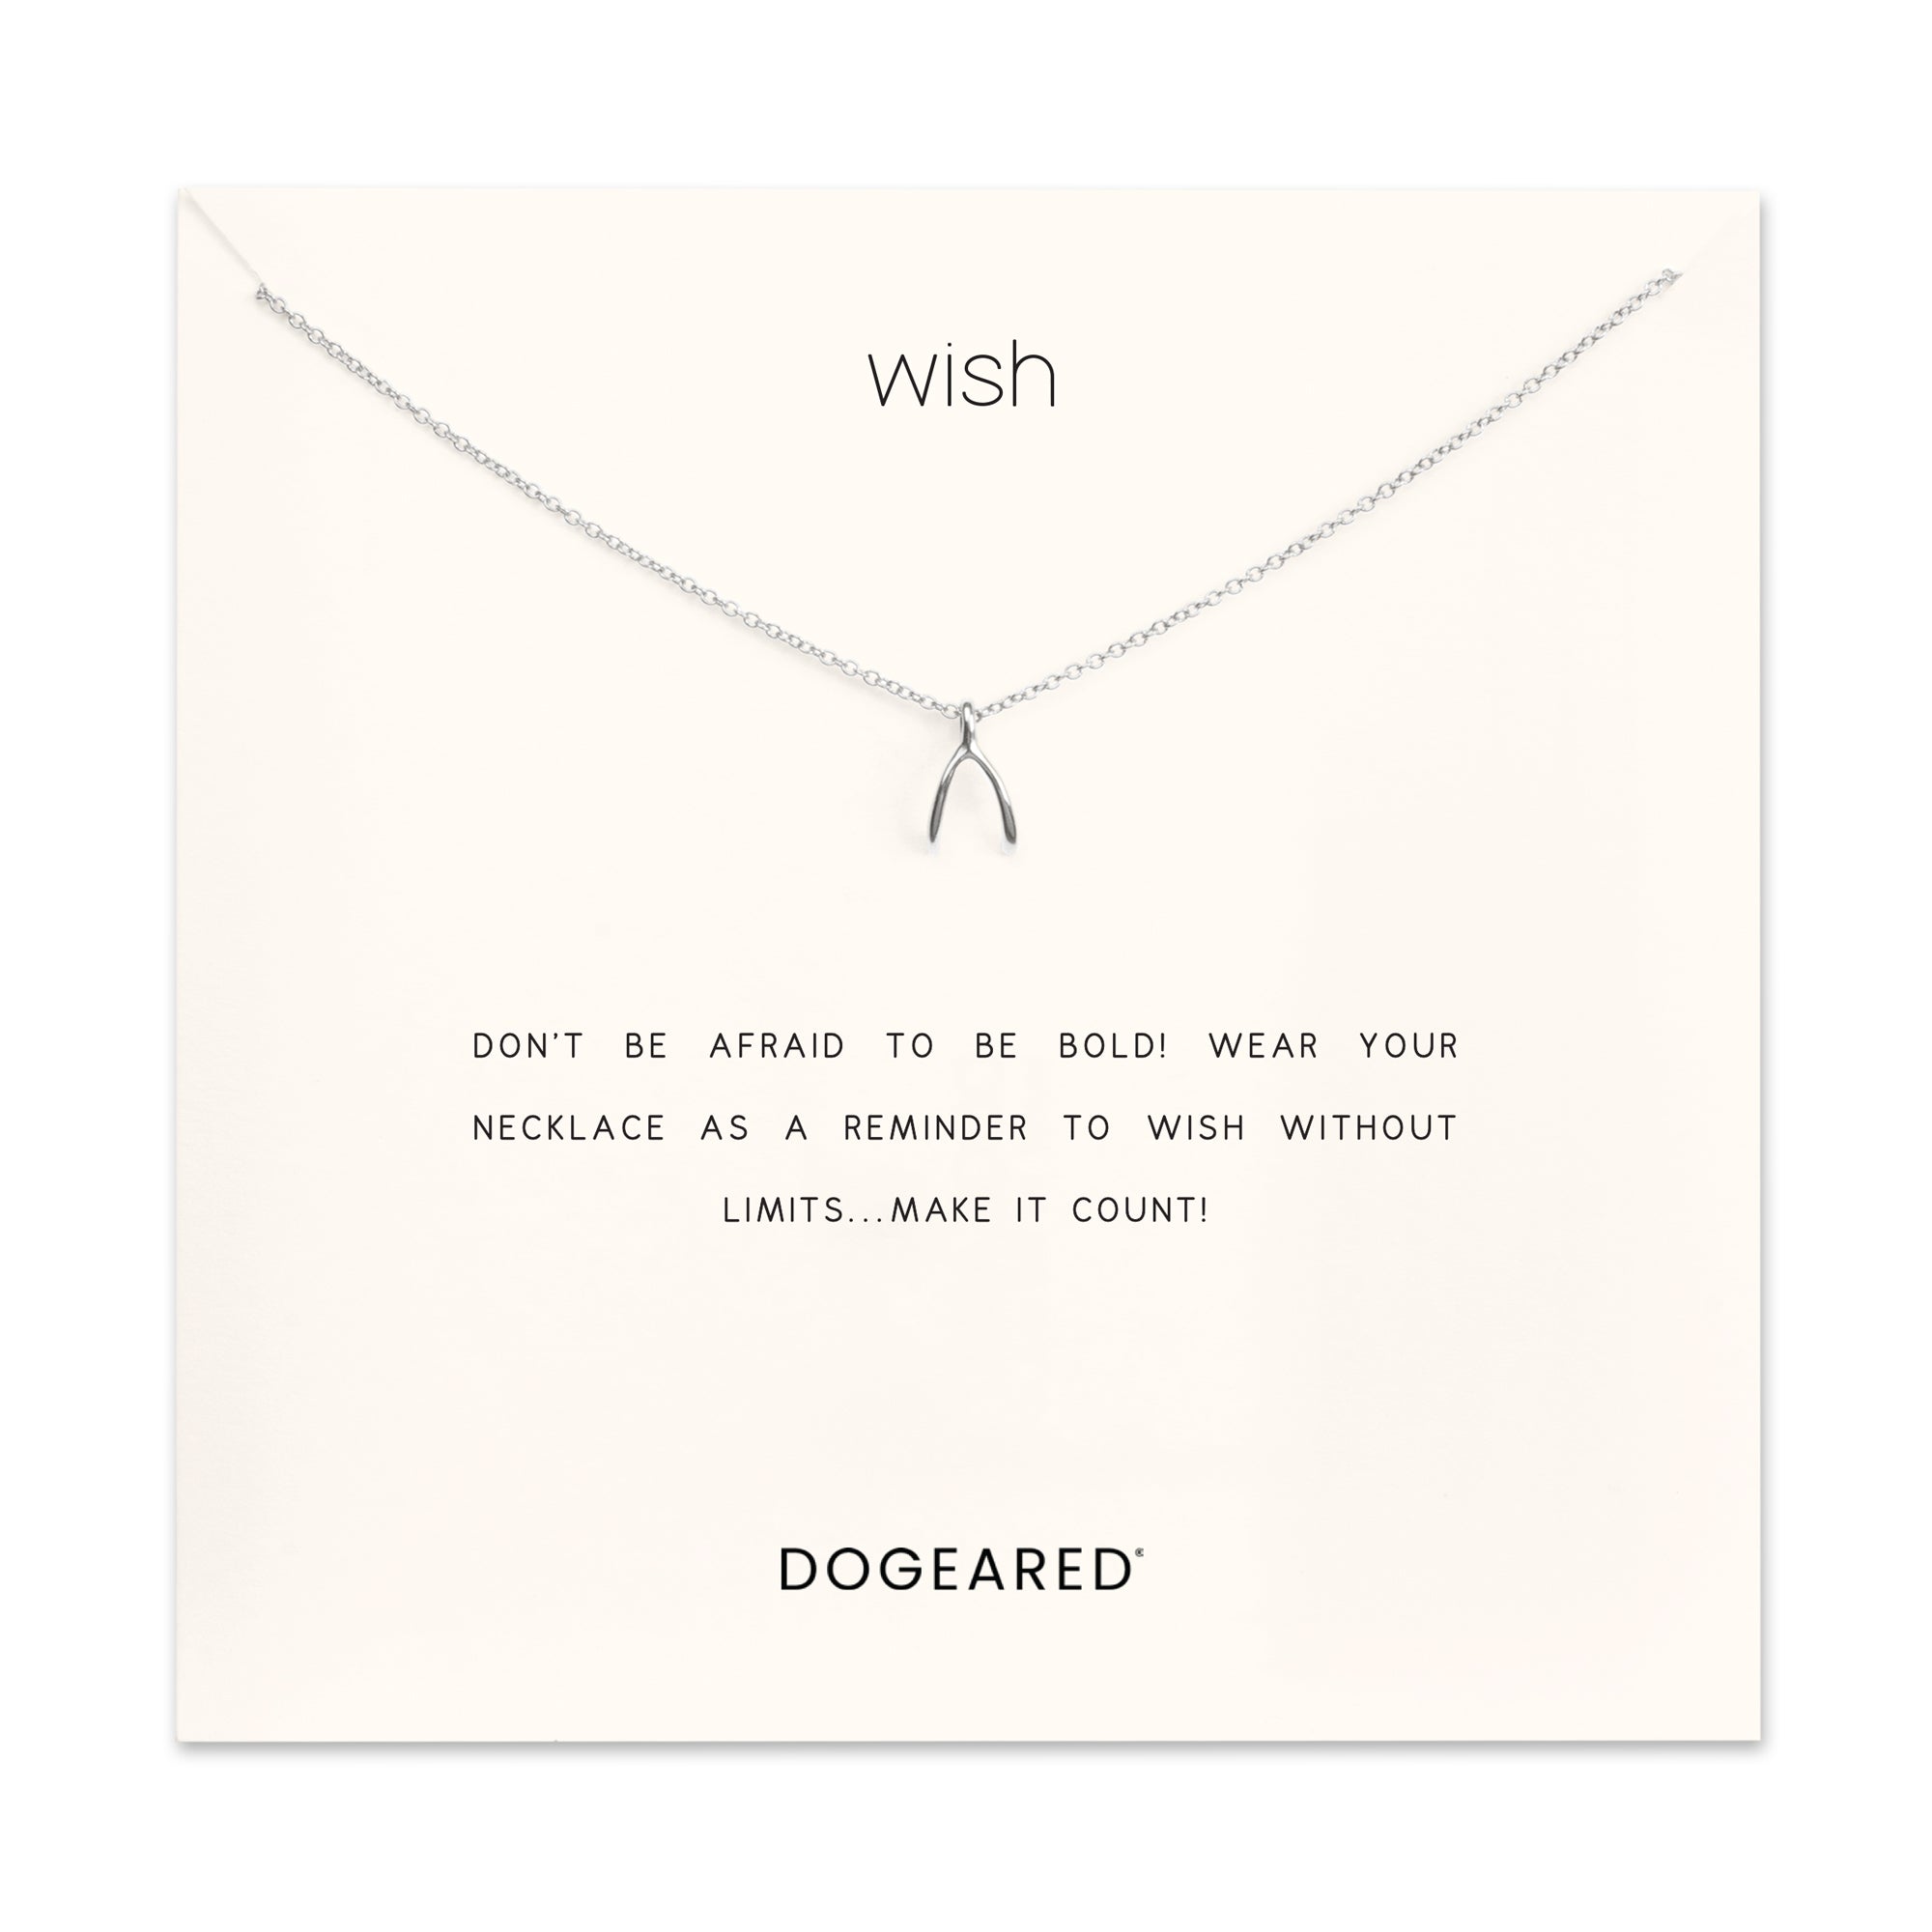 Wish necklace - Dogeared